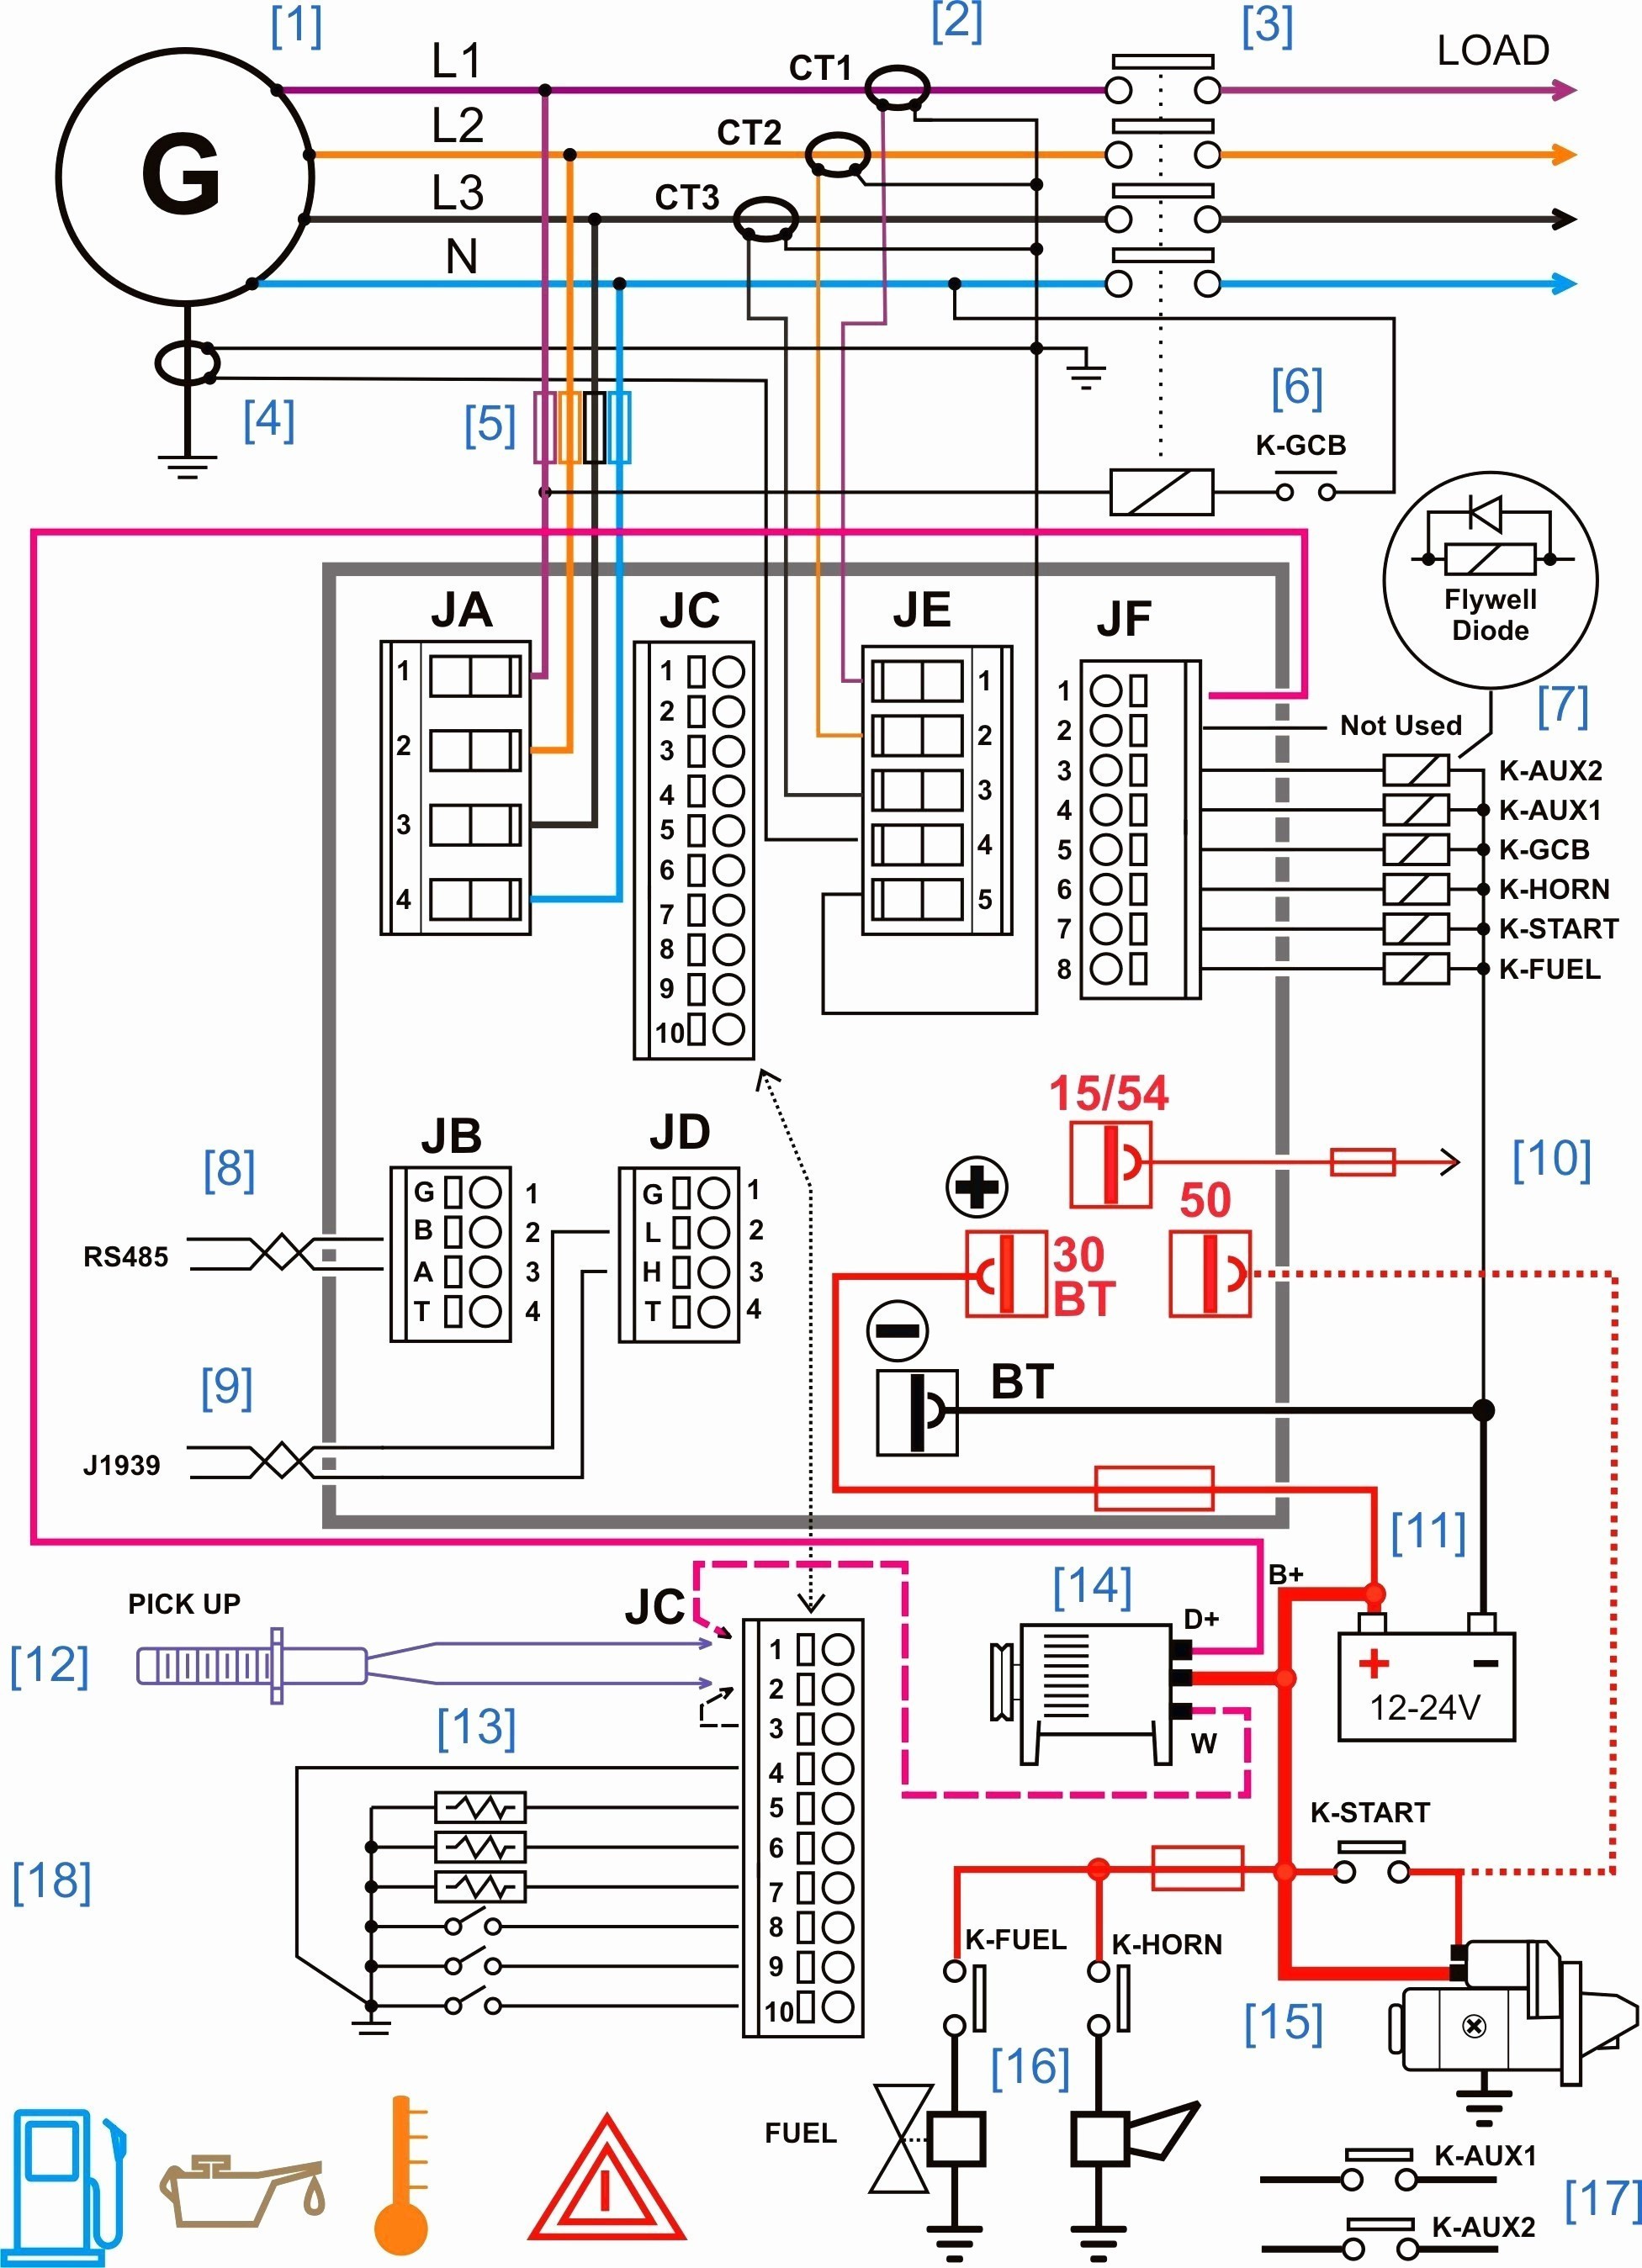 Car Wiring Harness Diagram Unique Car Stereo Wiring Diagrams 0d